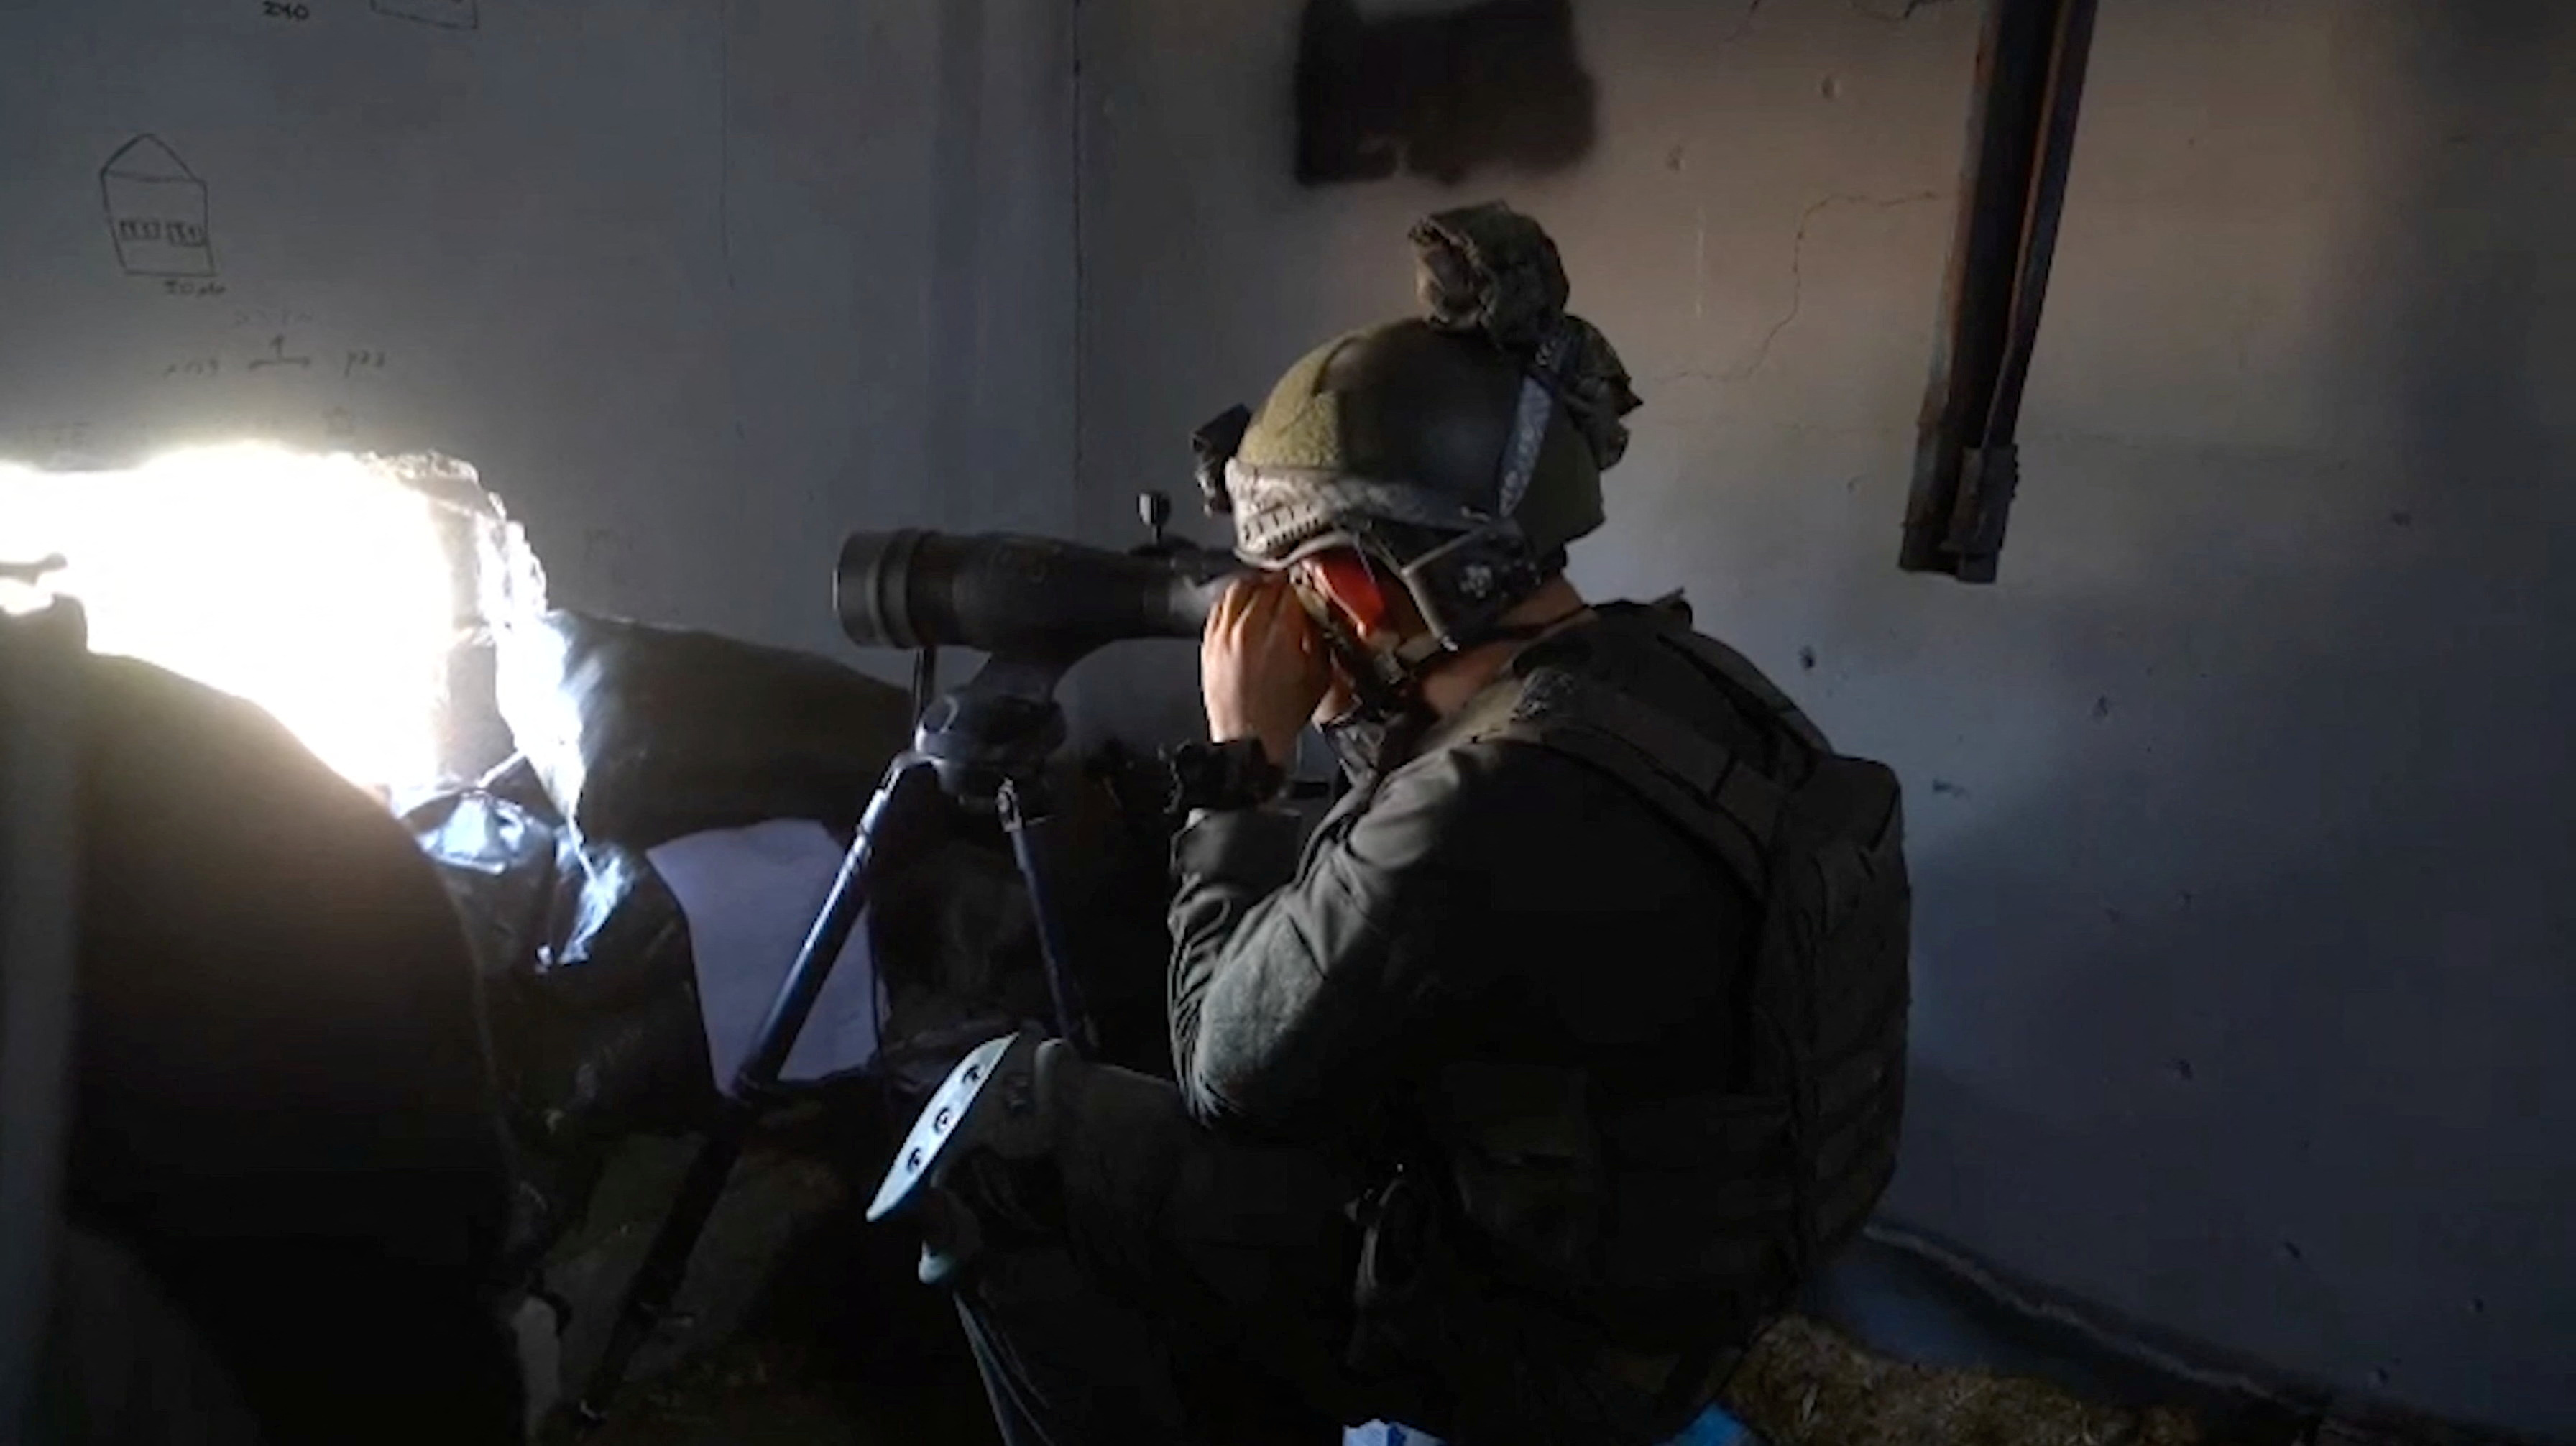 Member of the Israeli army operates in a location given as Gaza